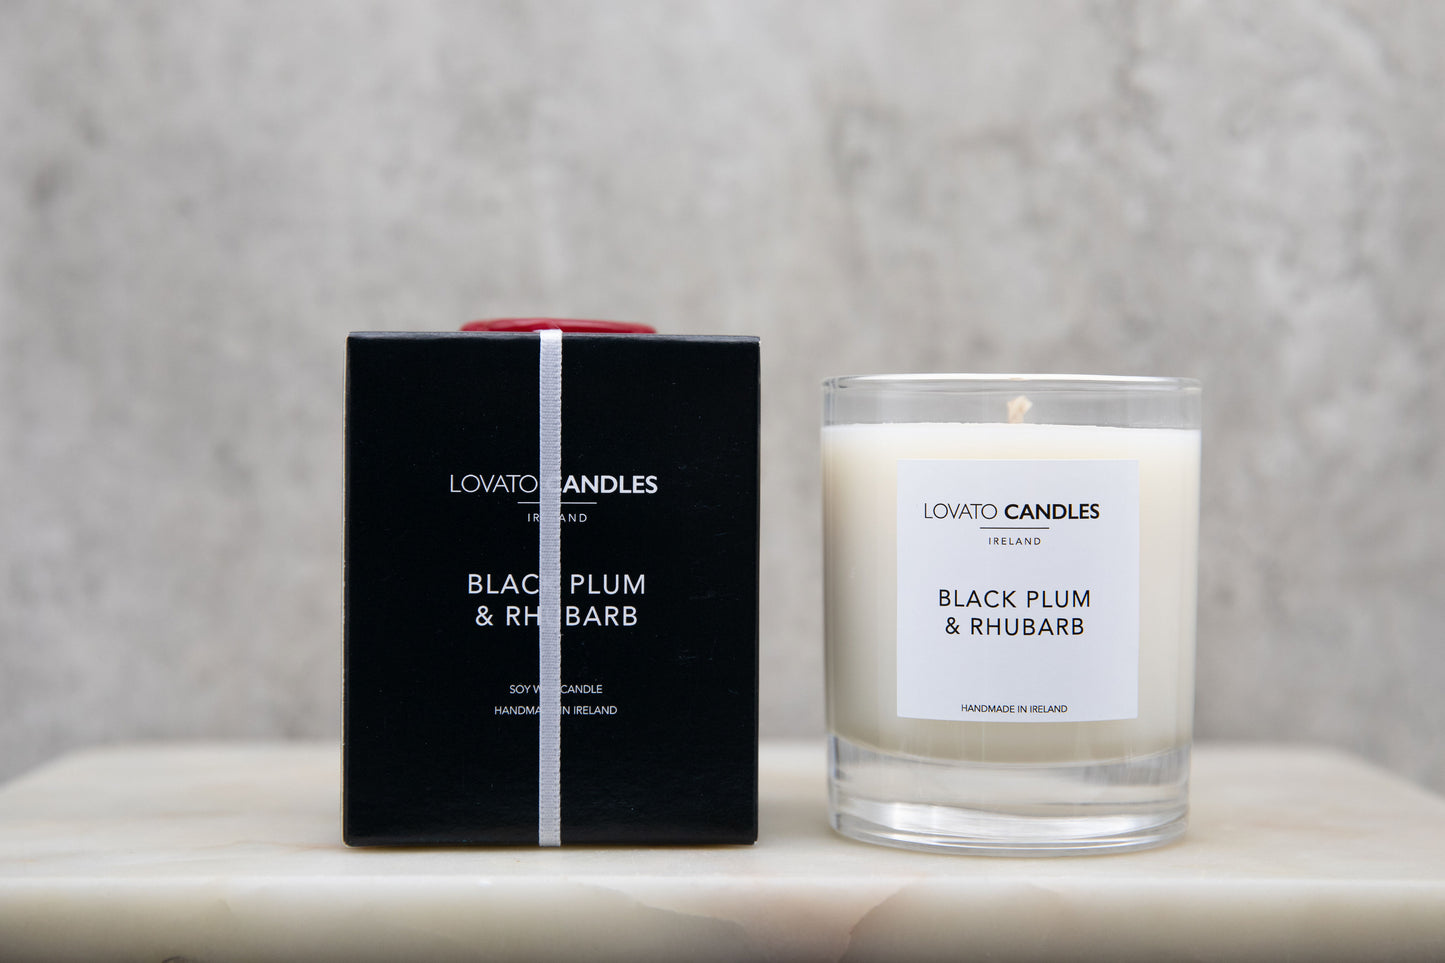 Clear Scented Candle with Luxury Black Box - Black Plum & Rhubarb